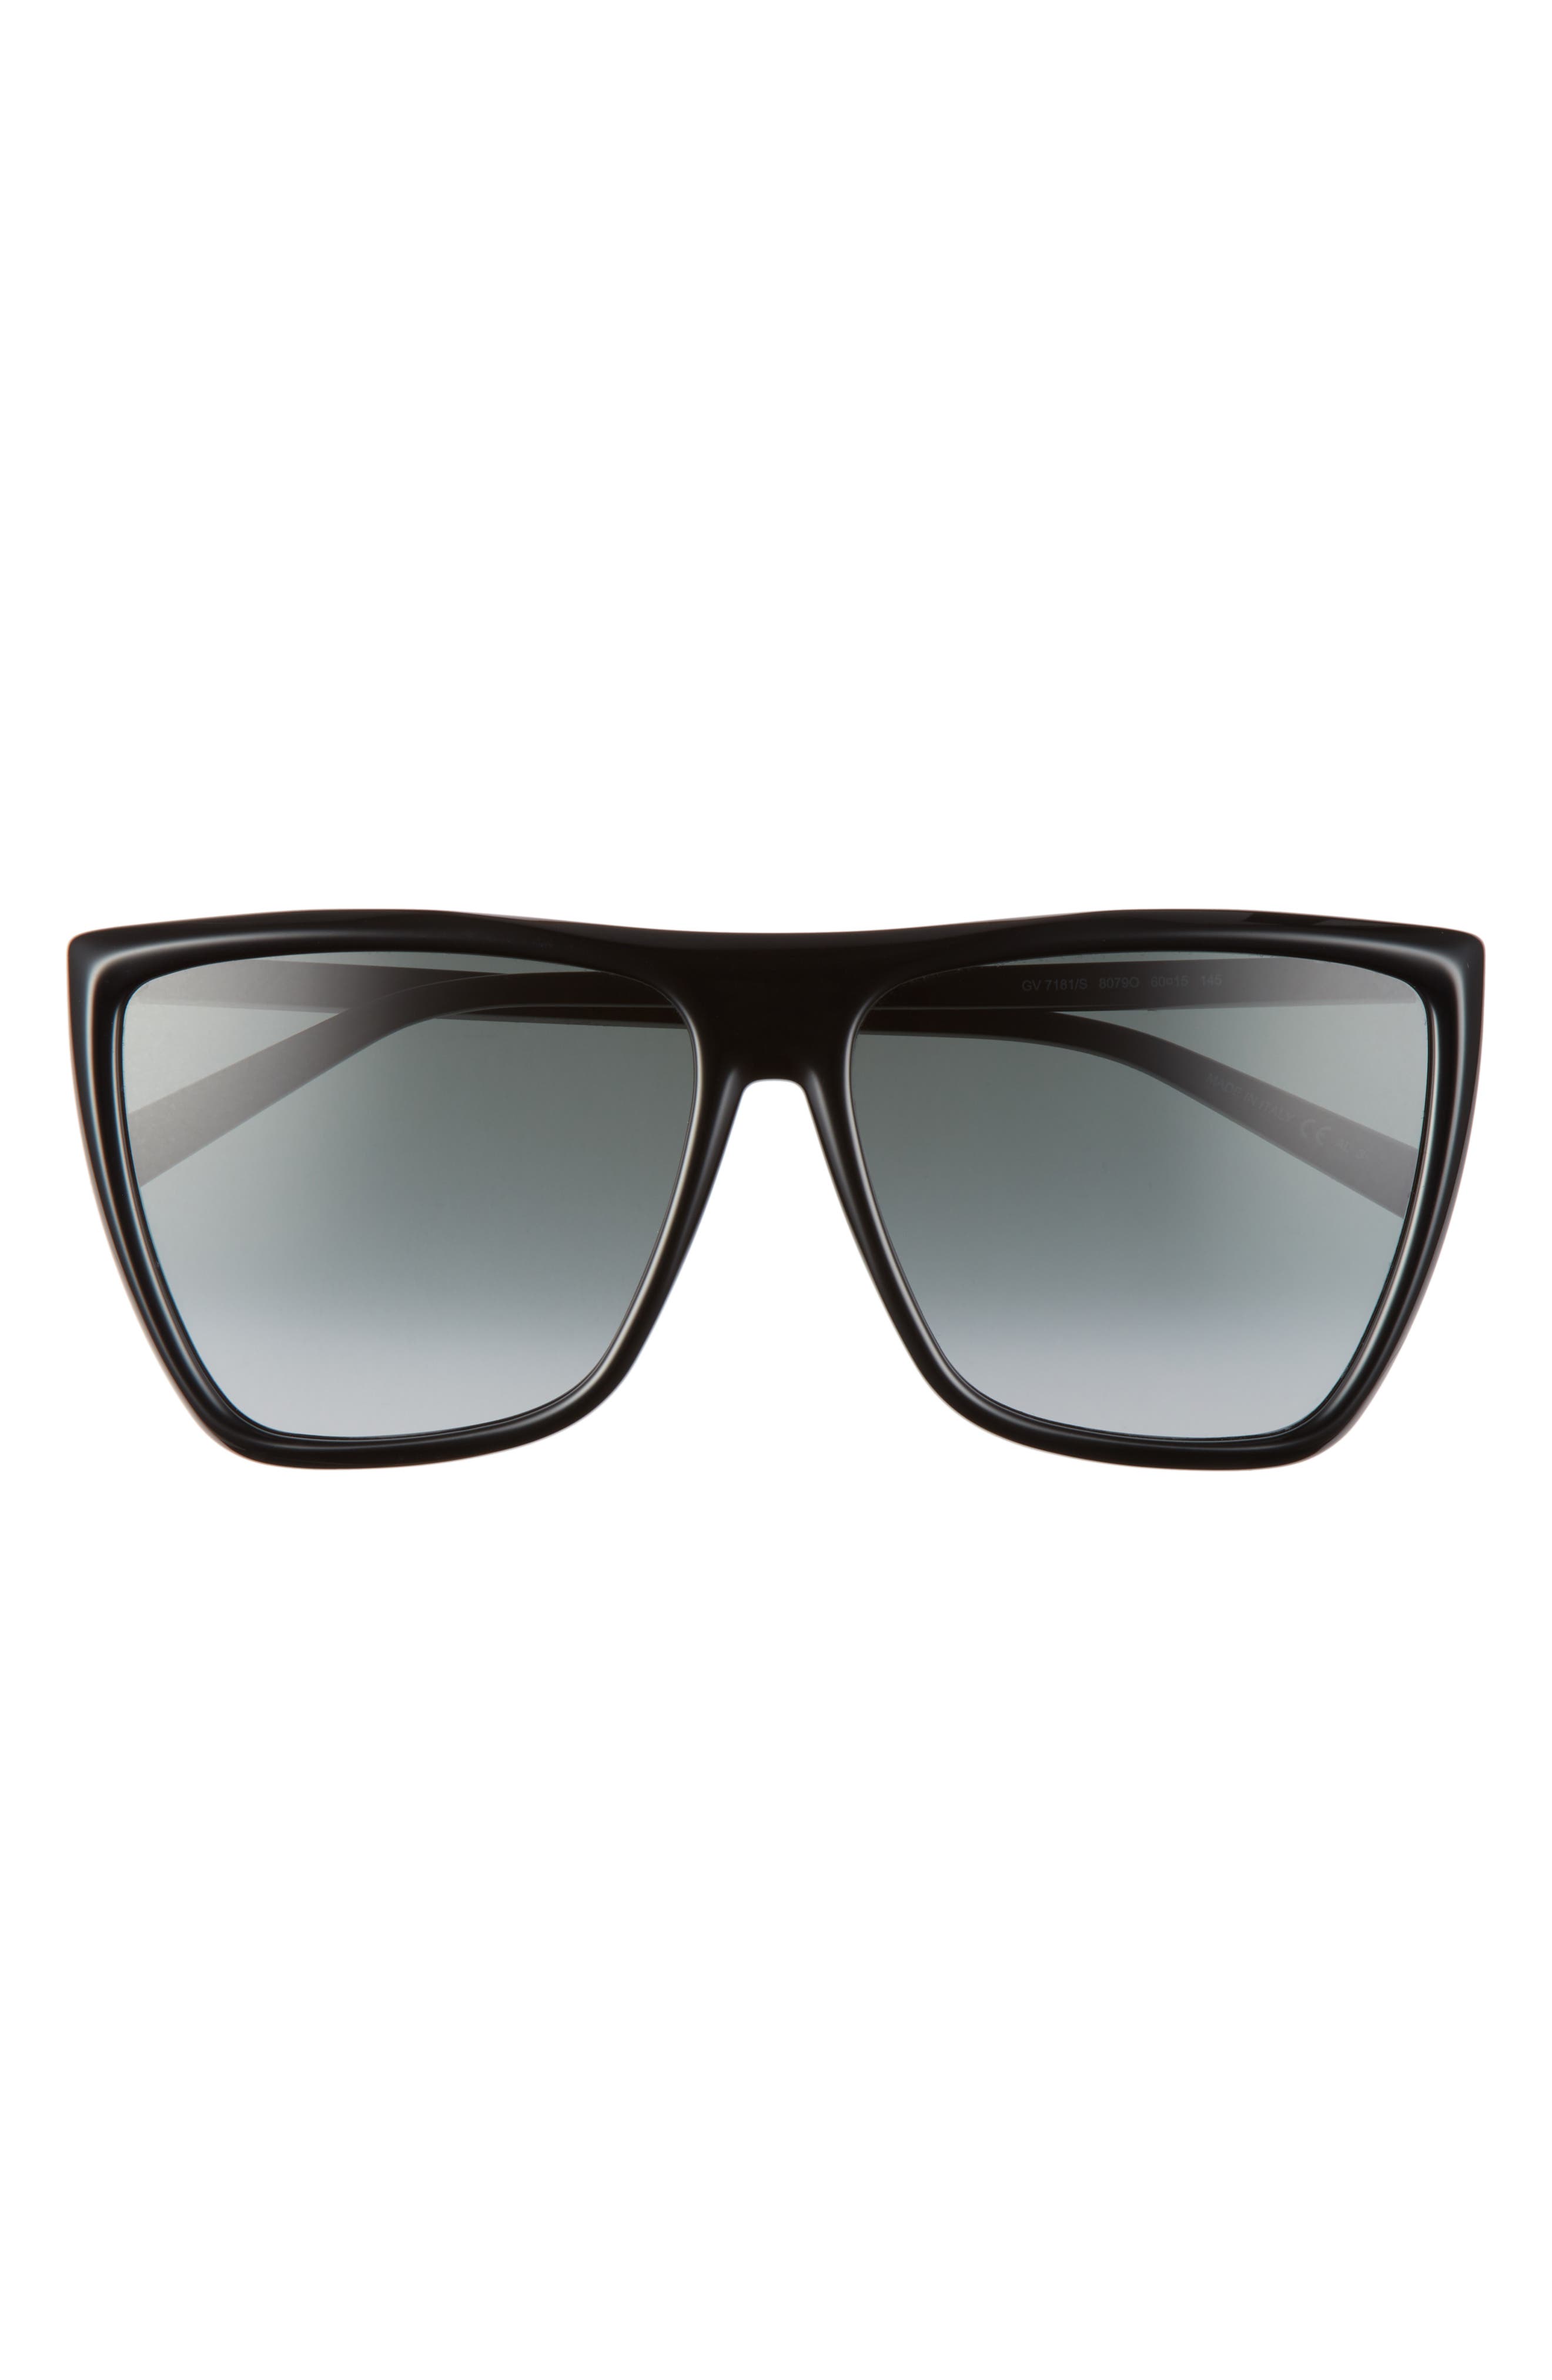 givenchy sunglasses for women